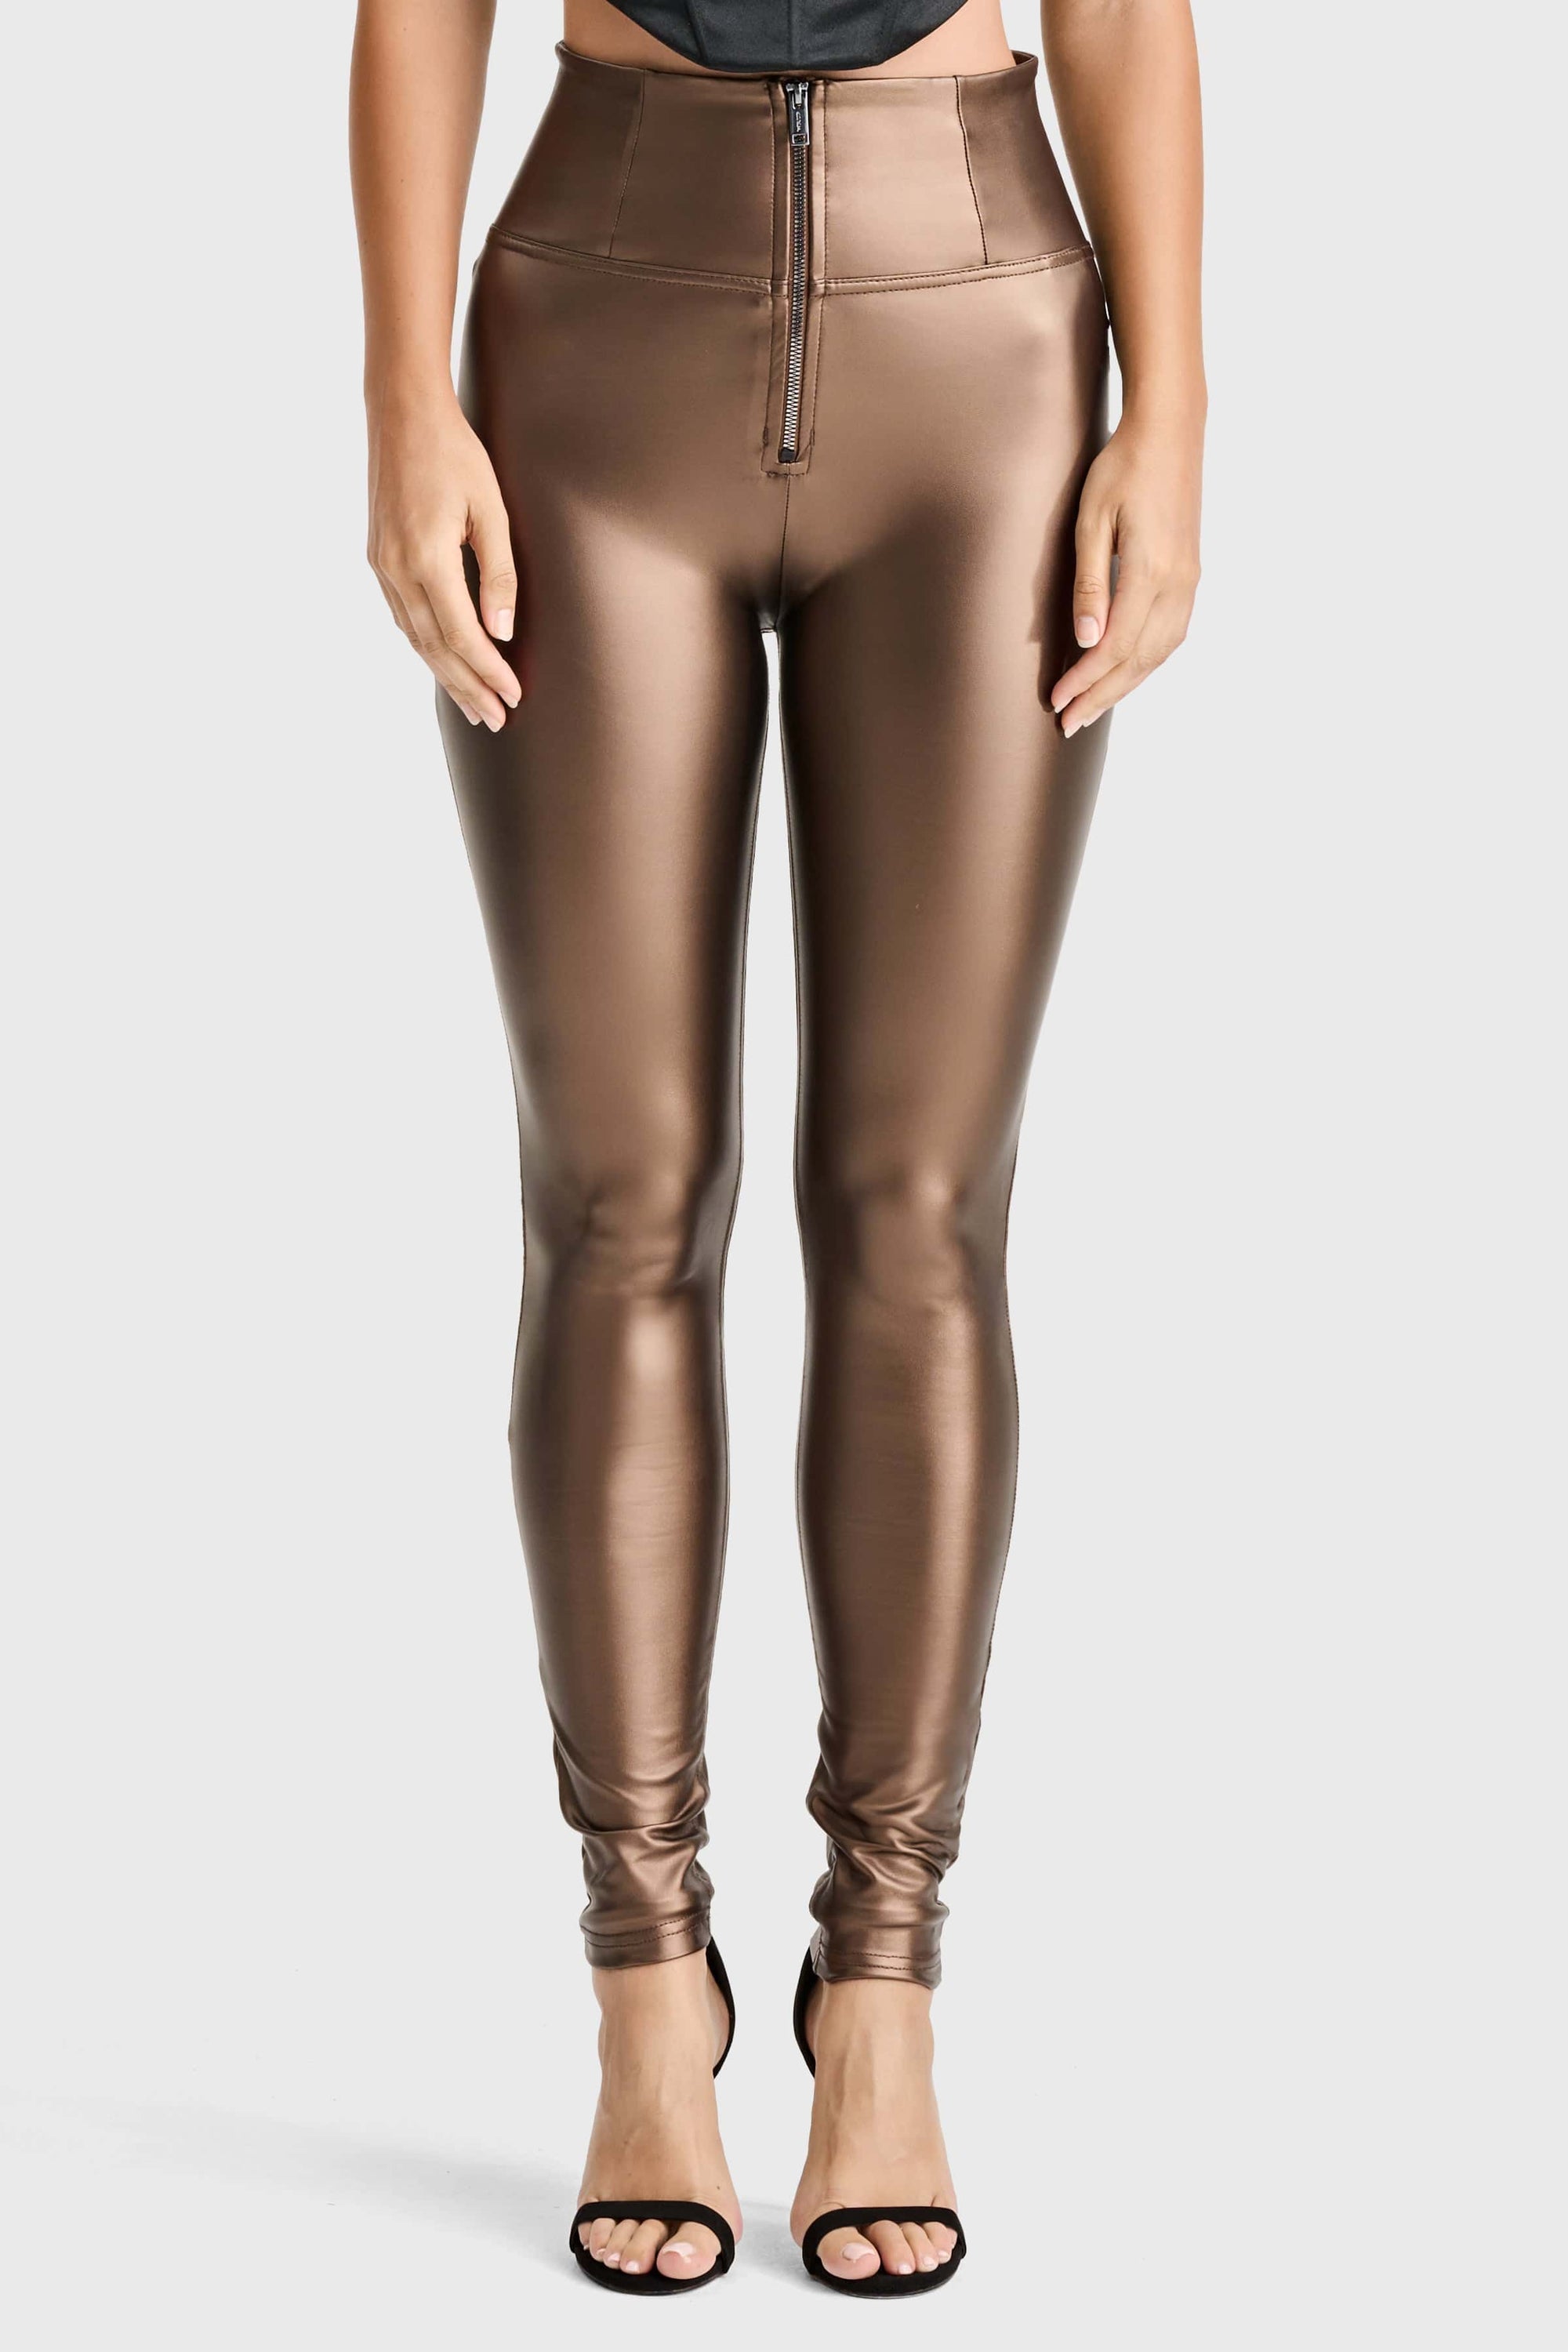 WR.UP® Faux Leather - Super High Waisted - Full Length - Bronze 2